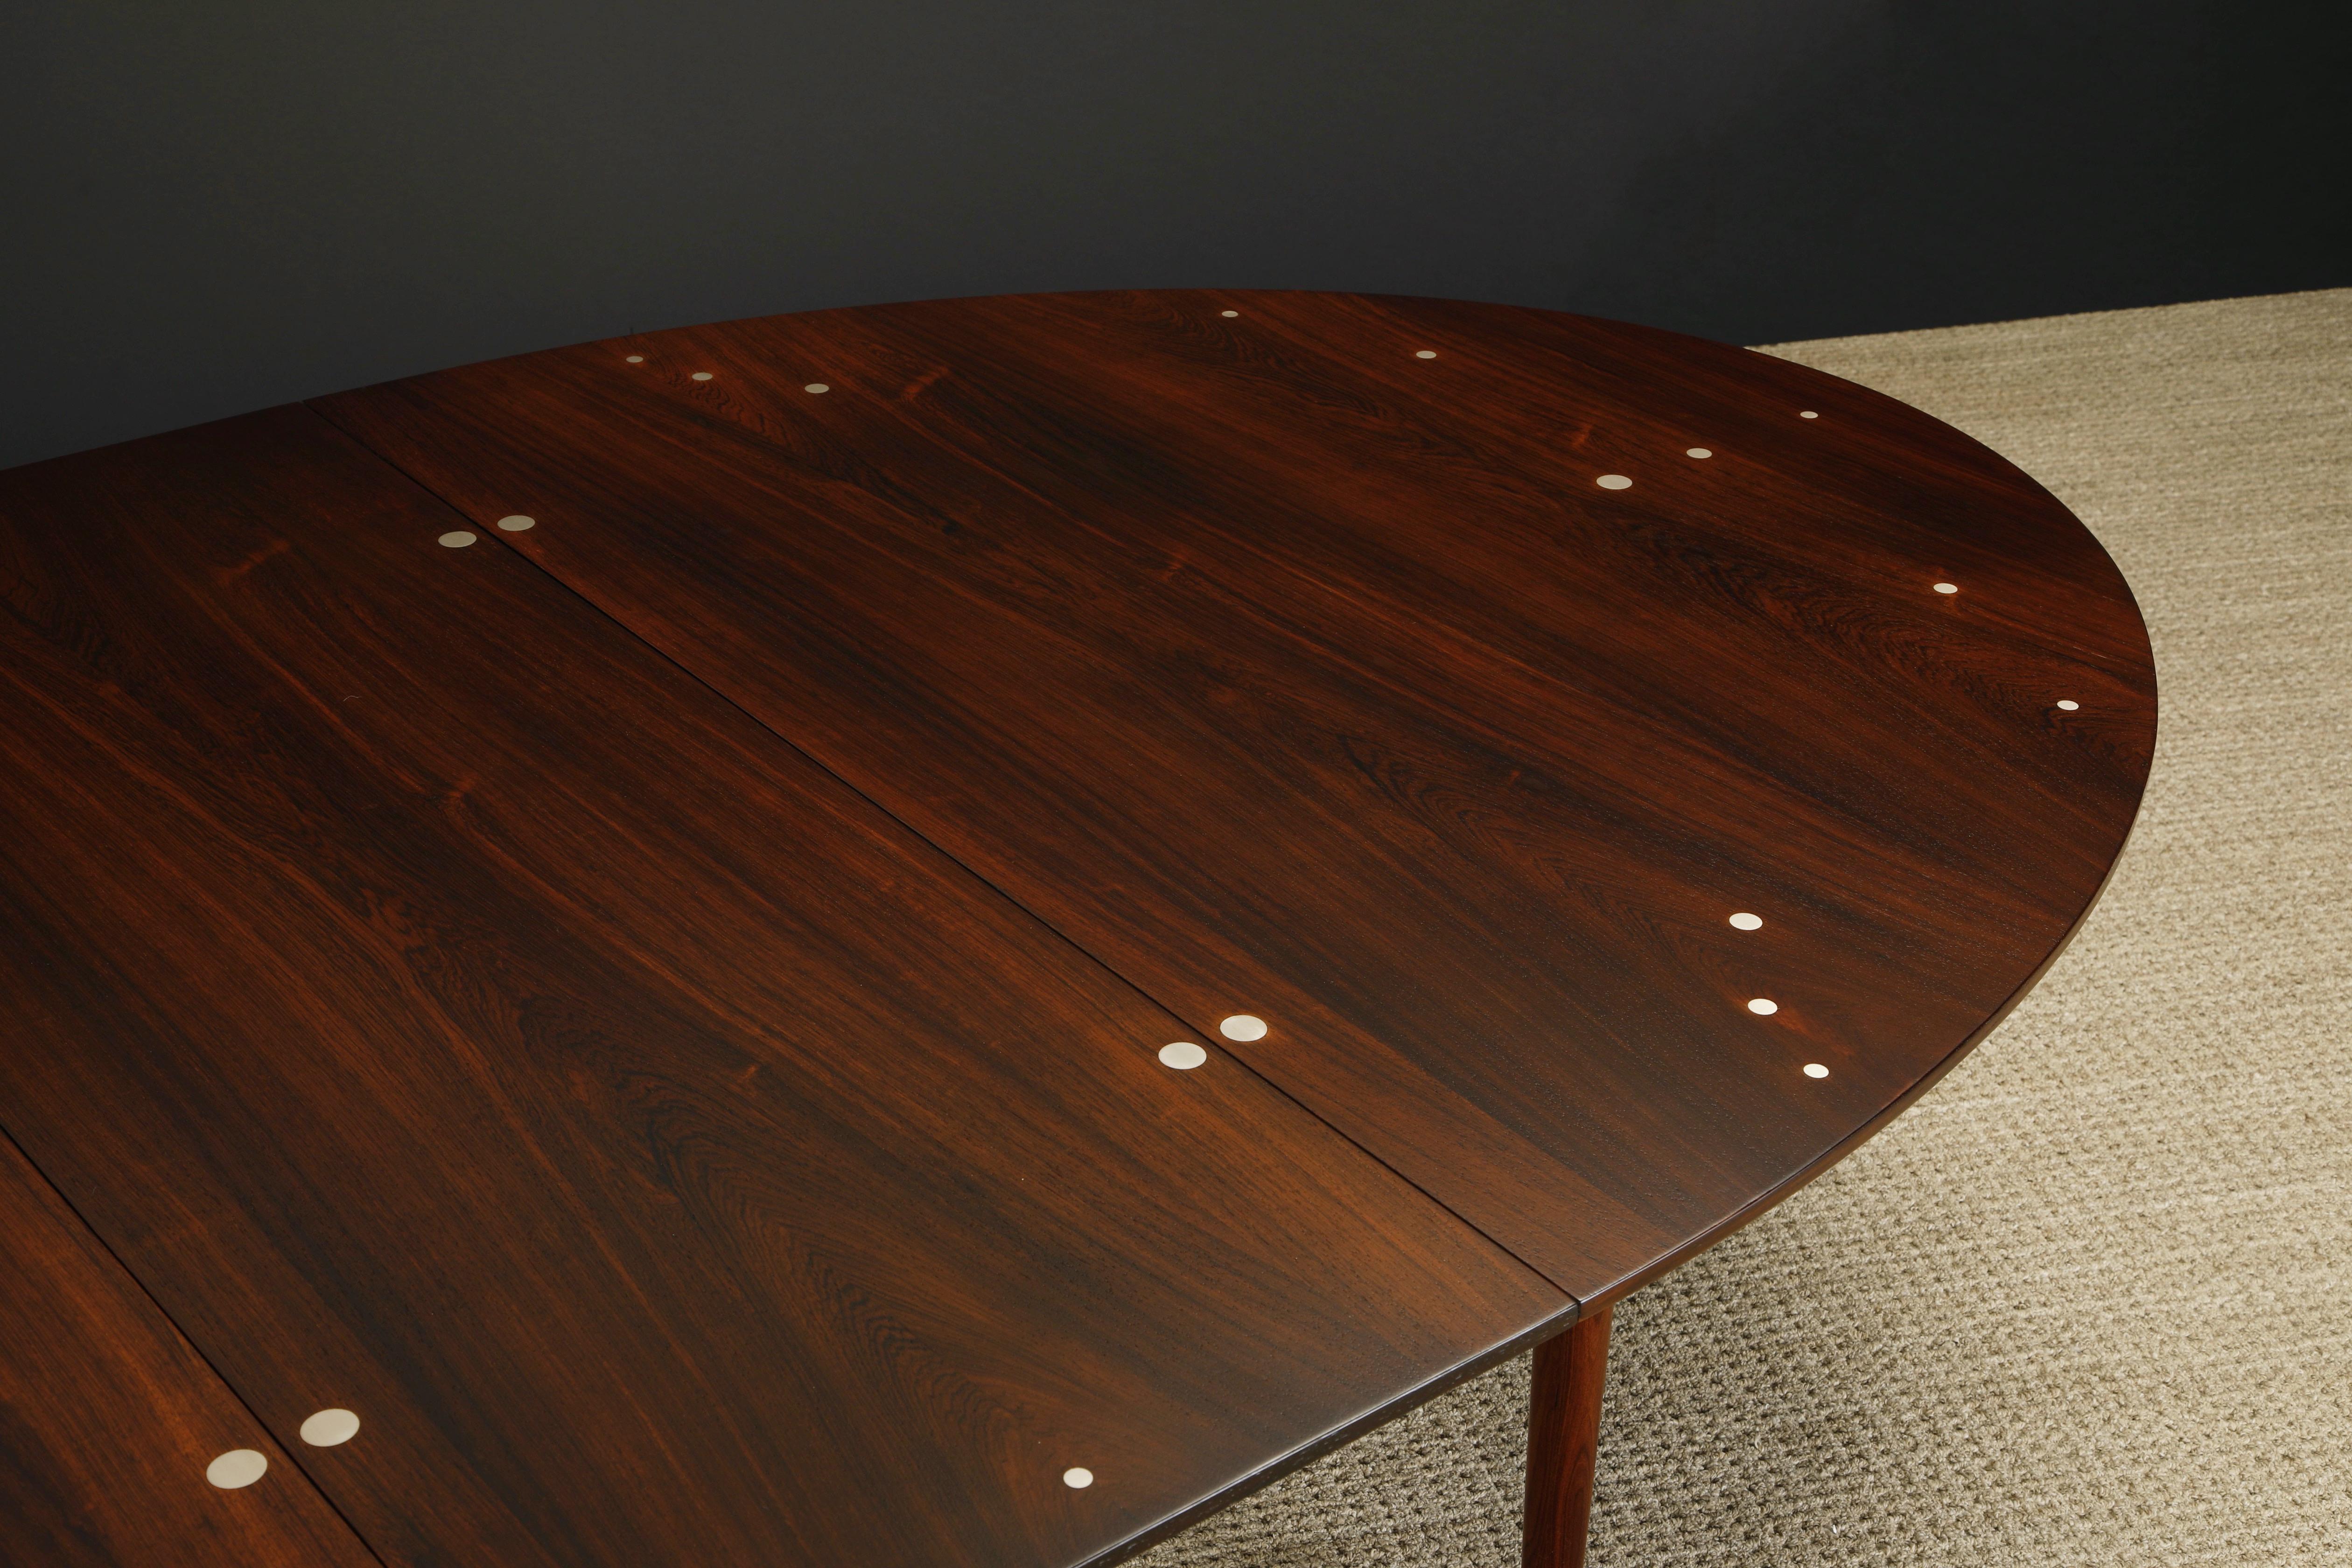 Finn Juhl 'Judas' Rosewood and Sterling Silver Dining Table, c 1950s, Signed For Sale 6